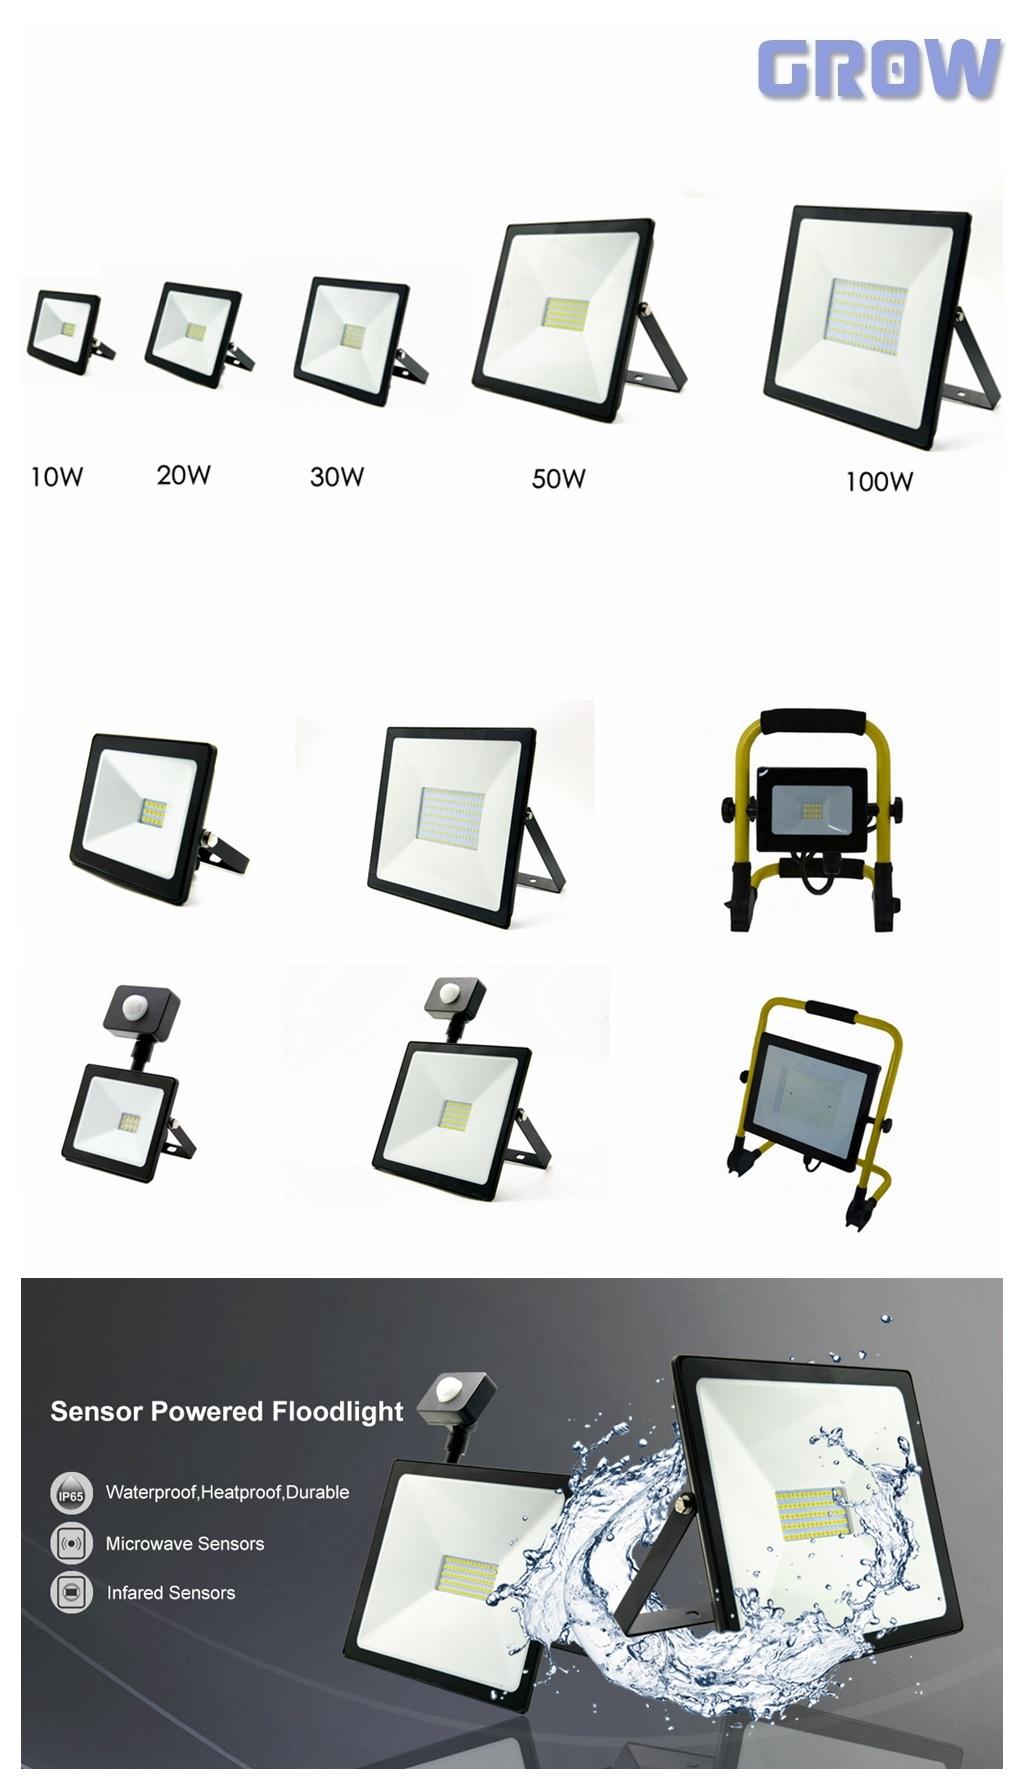 LED Rechargeable Foldable LED Portable Work Light 10W 20W 30W 50W 100W Waterproof Emergency Floodlight with Stand